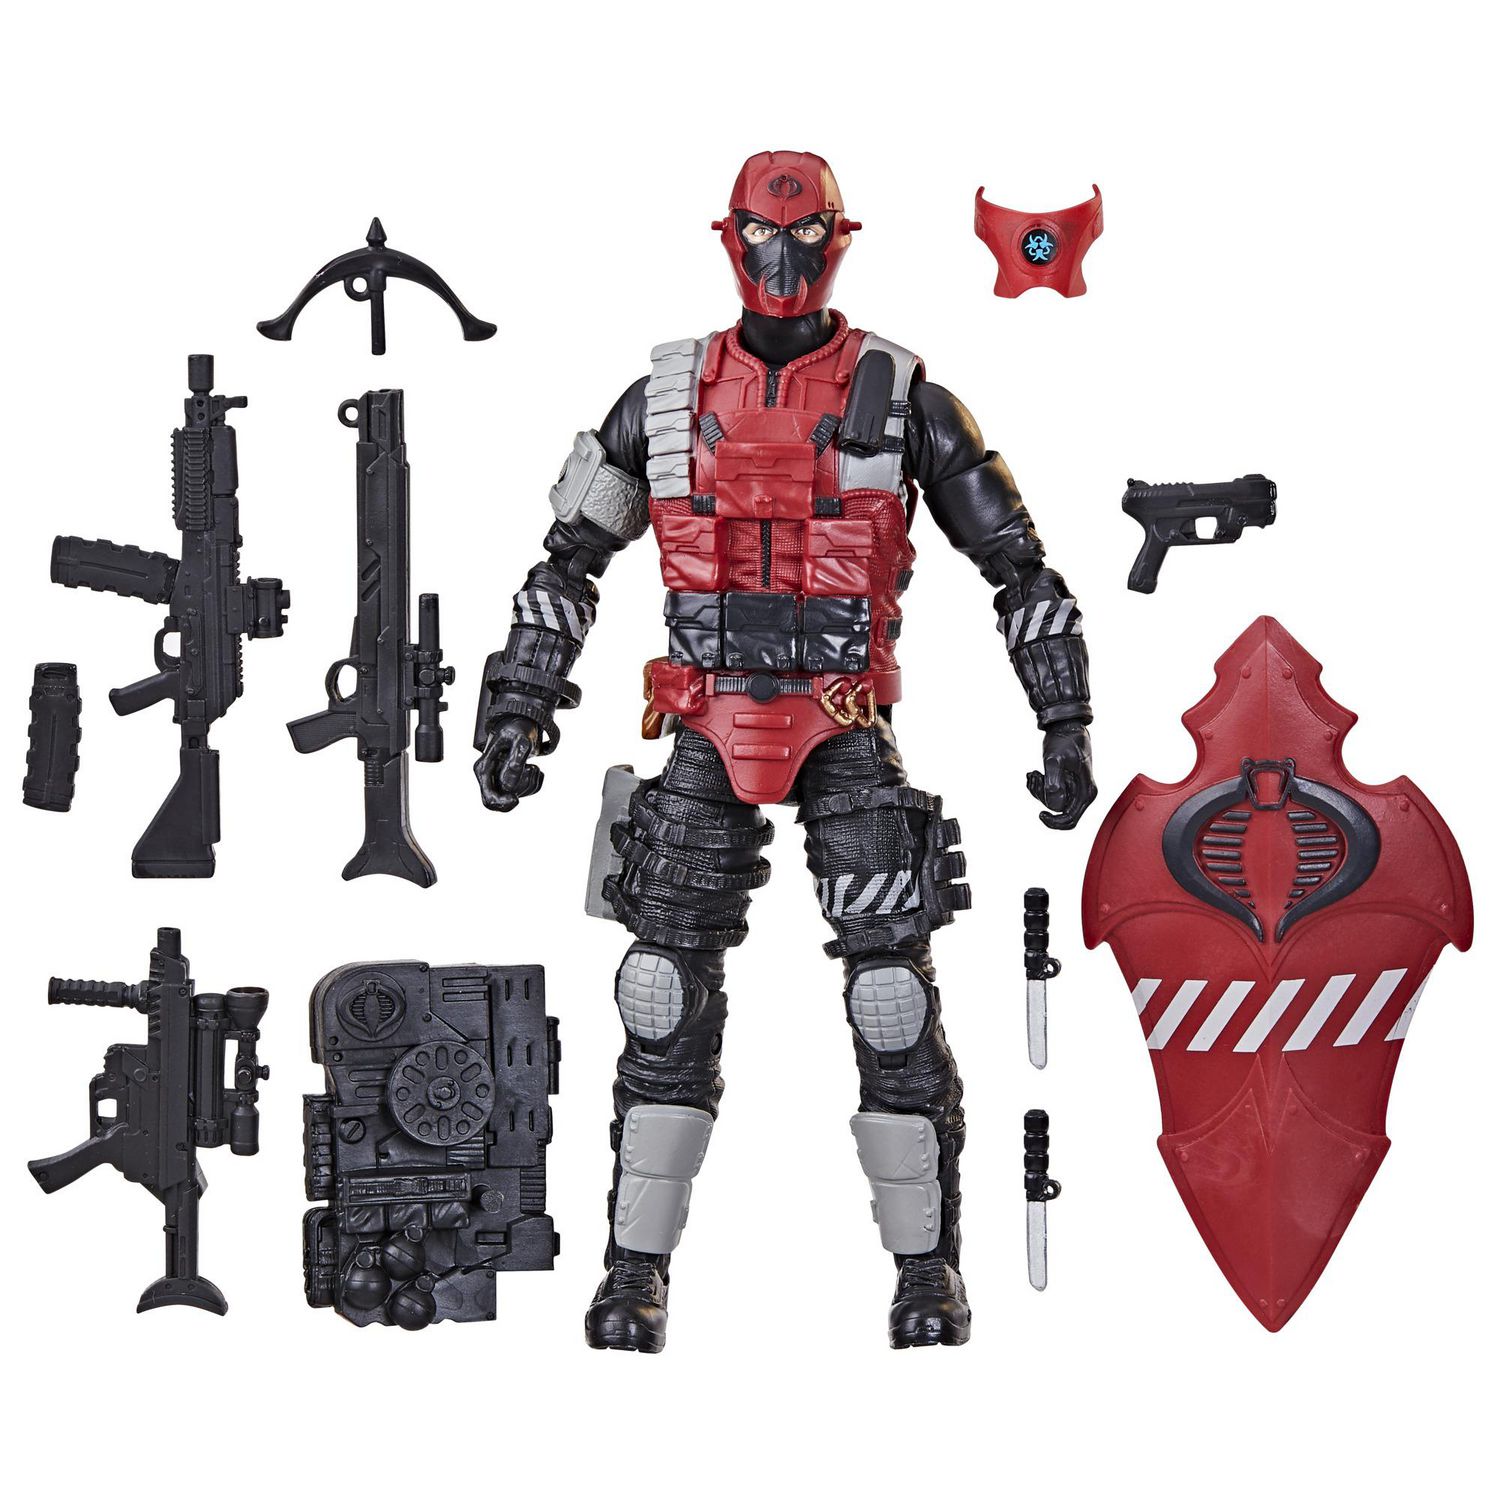 G.I. Joe Classified Series Crimson Alley Viper, Collectible G.I. Joe Action  Figure, 91, 6 inch Action Figures For Boys & Girls, With 10 Accessories